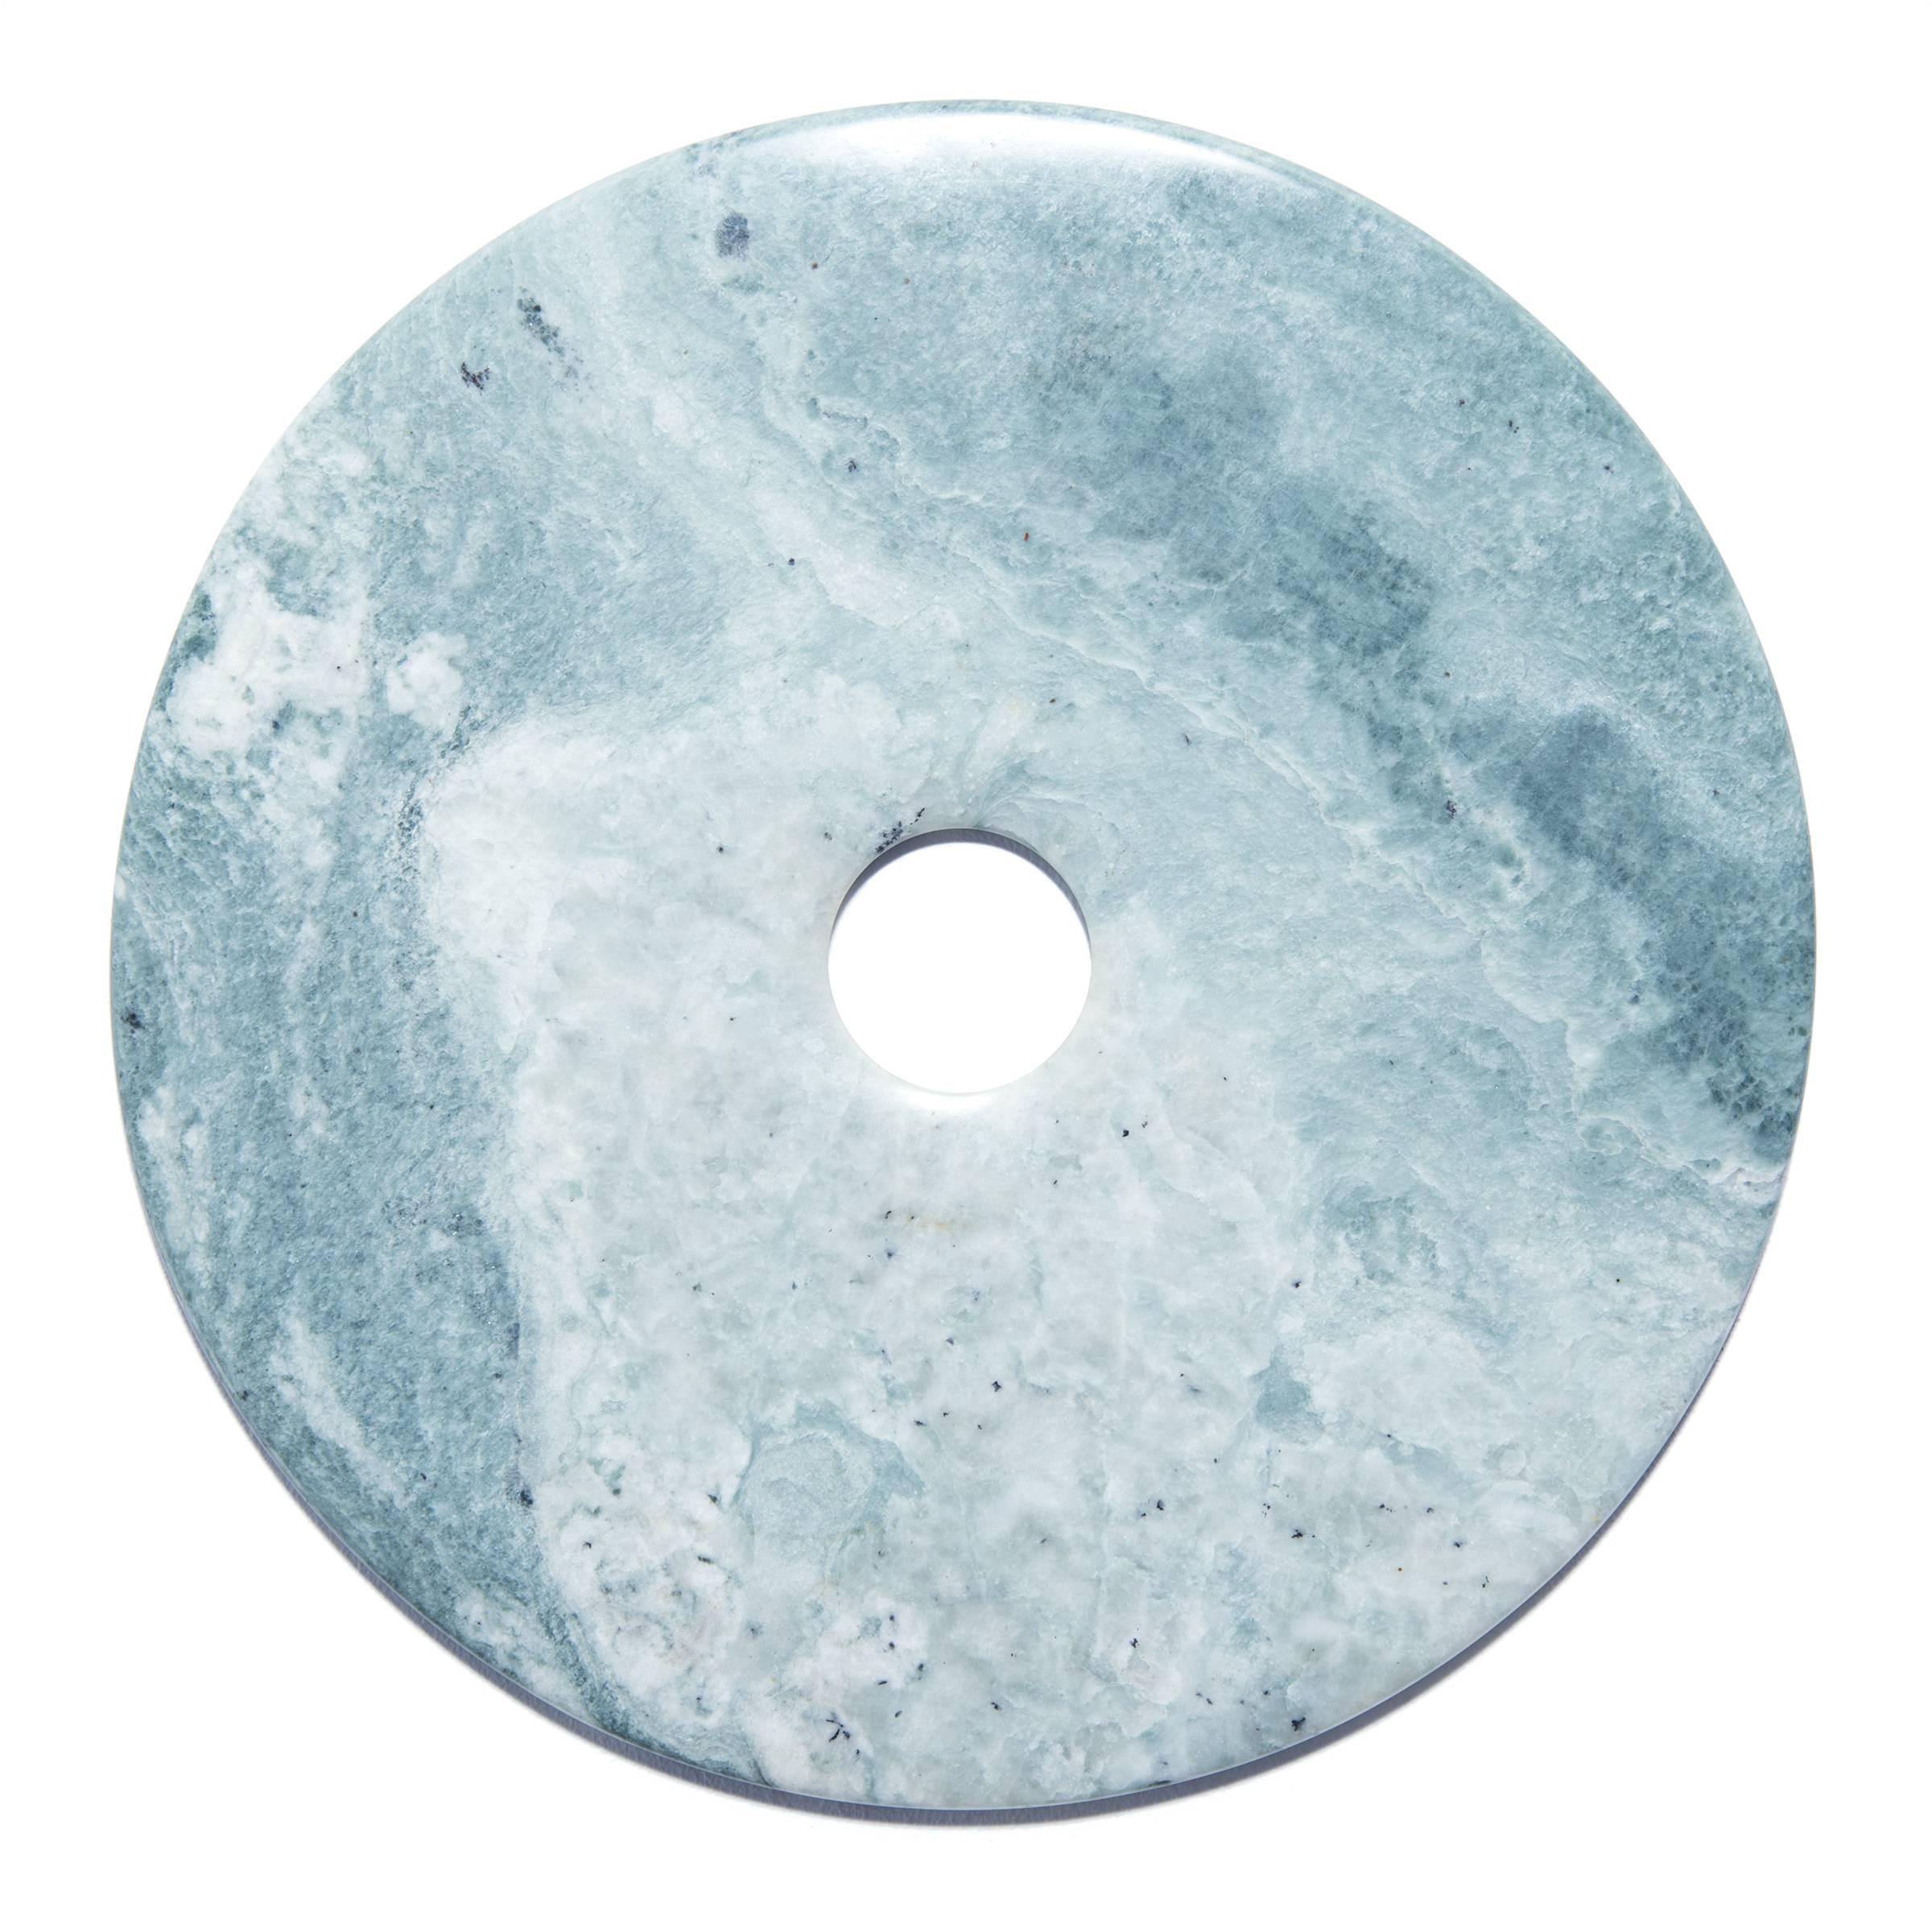 Connoisseurs have cherished jades, like this one, for thousands of years, attracted by their rich heritage, beauty, and rarity. Celadon stones were among the most sought after, Chinese artisans tried to duplicate this natural color in their green